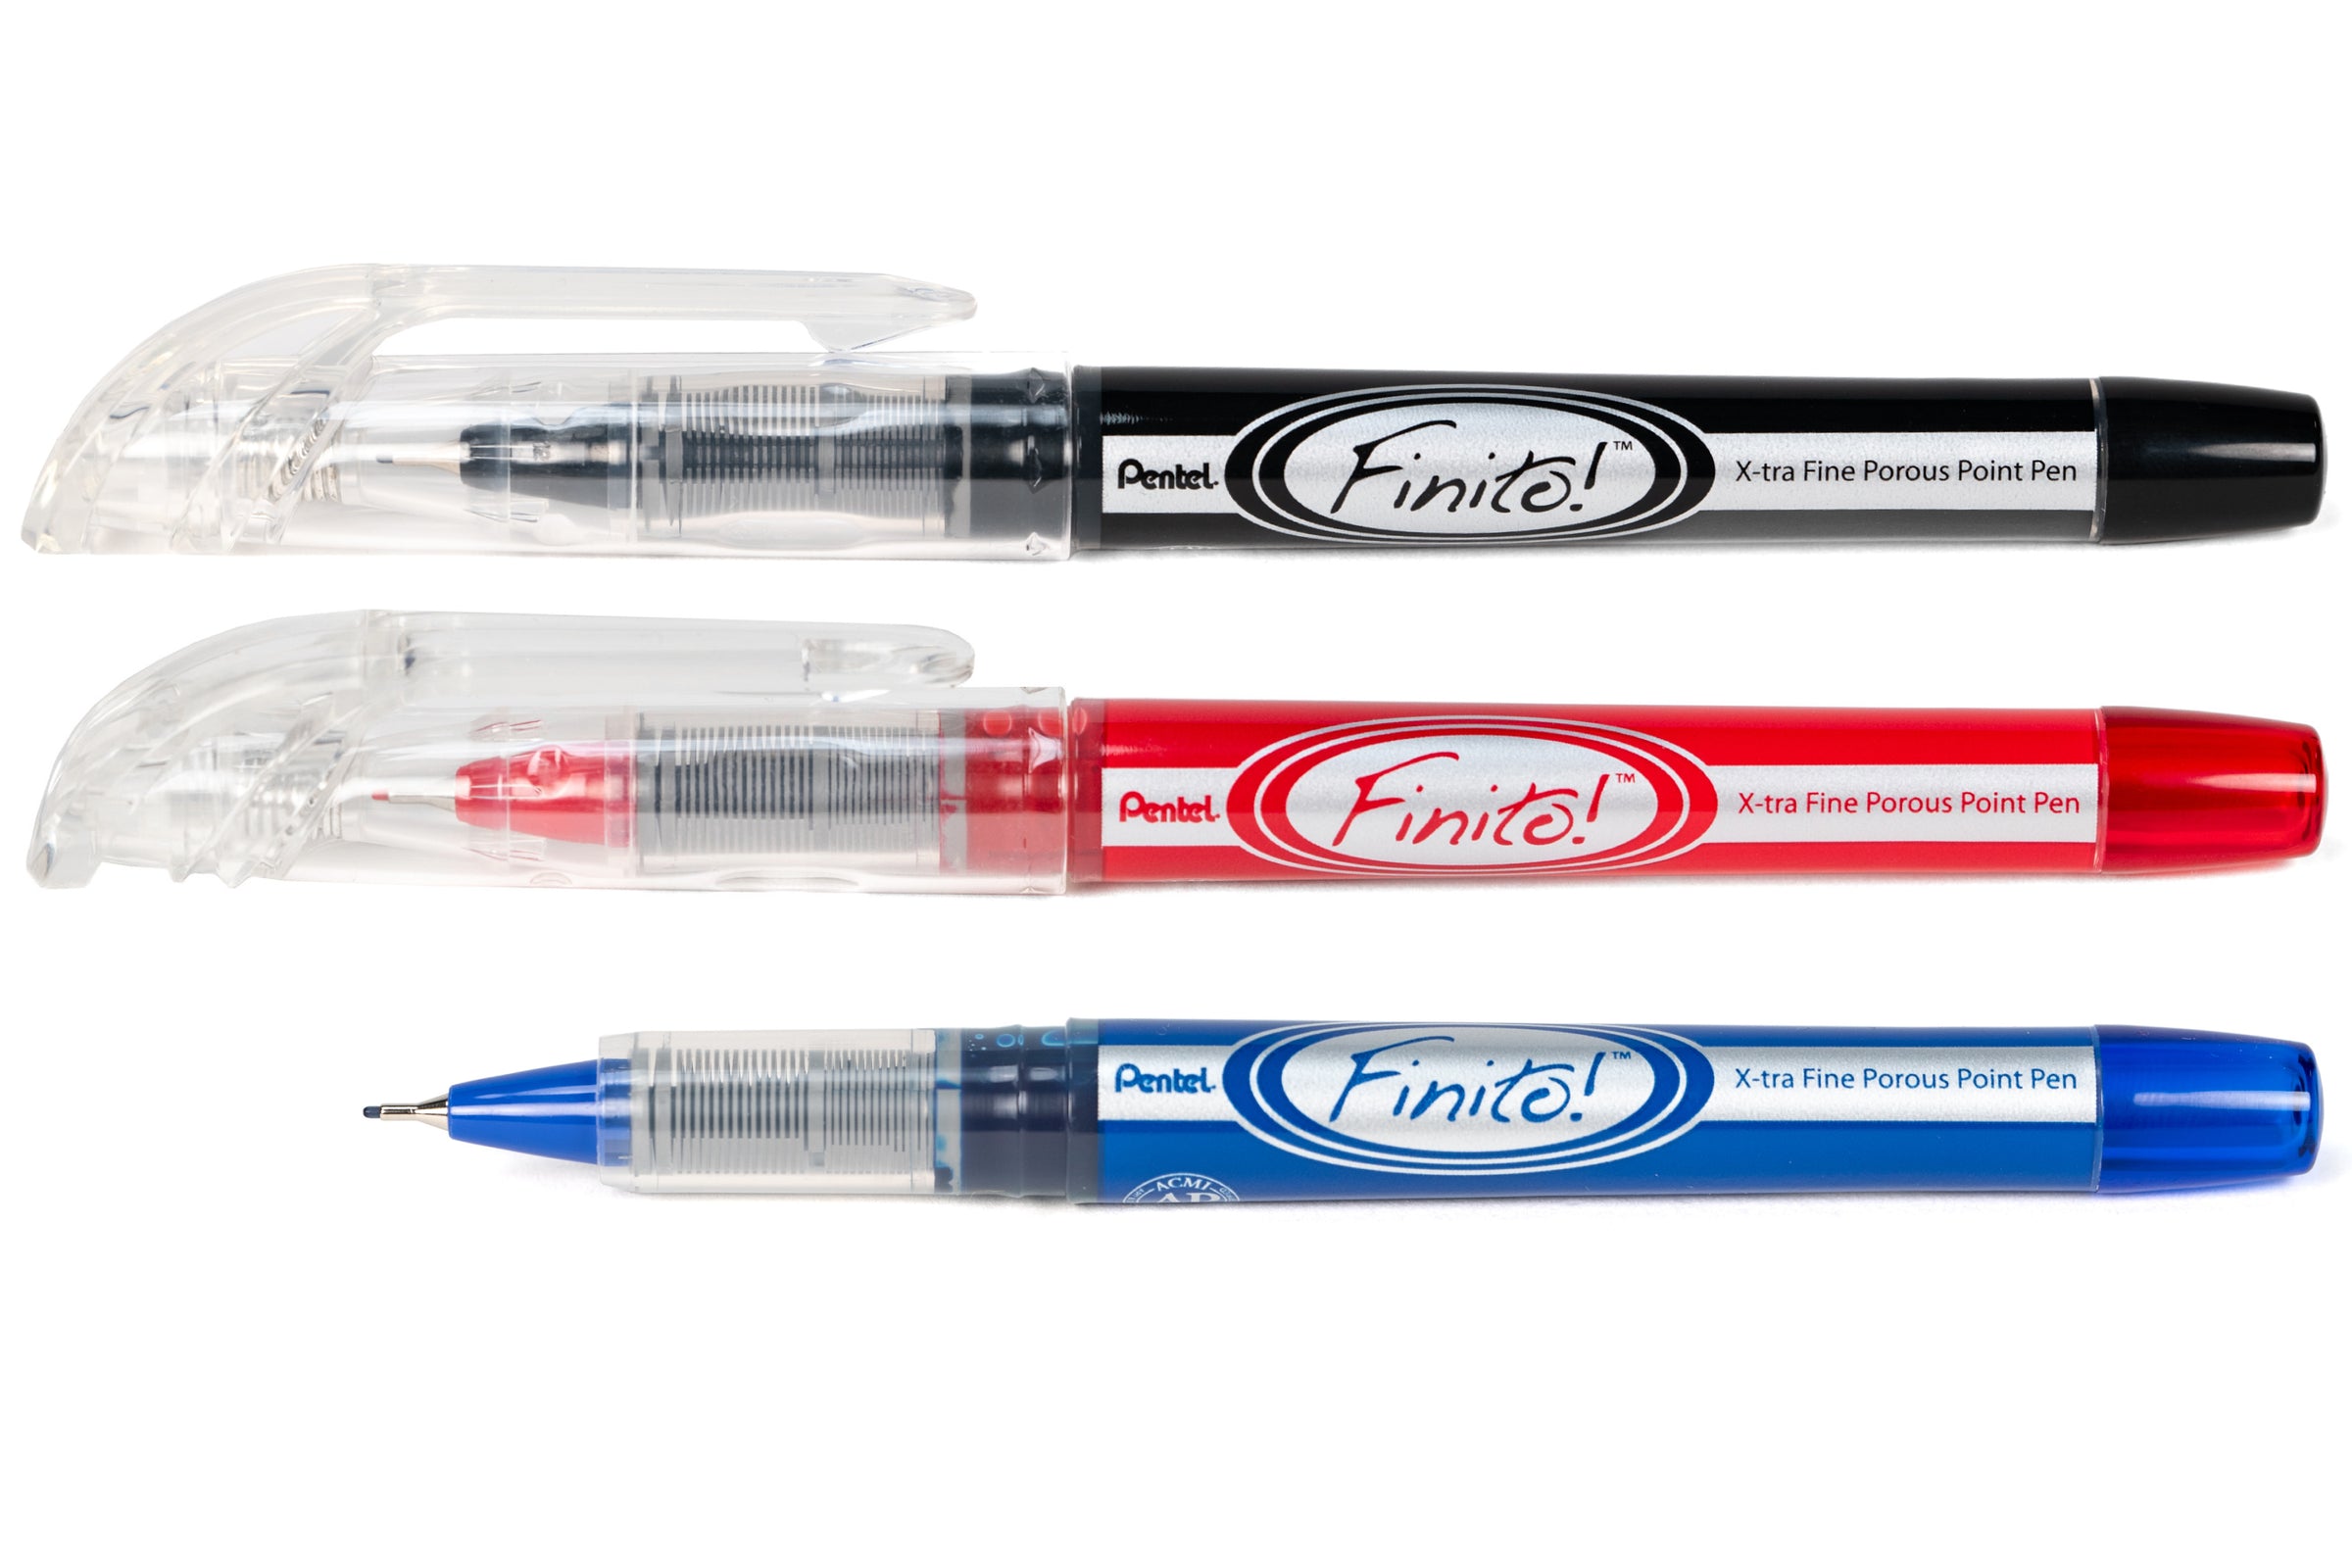 Pentel FINITO! Porous Point Pen, Extra Fine Point Tip, Blue Ink, Sold as 2  Pack, 24 Pens Total (SD98-C)